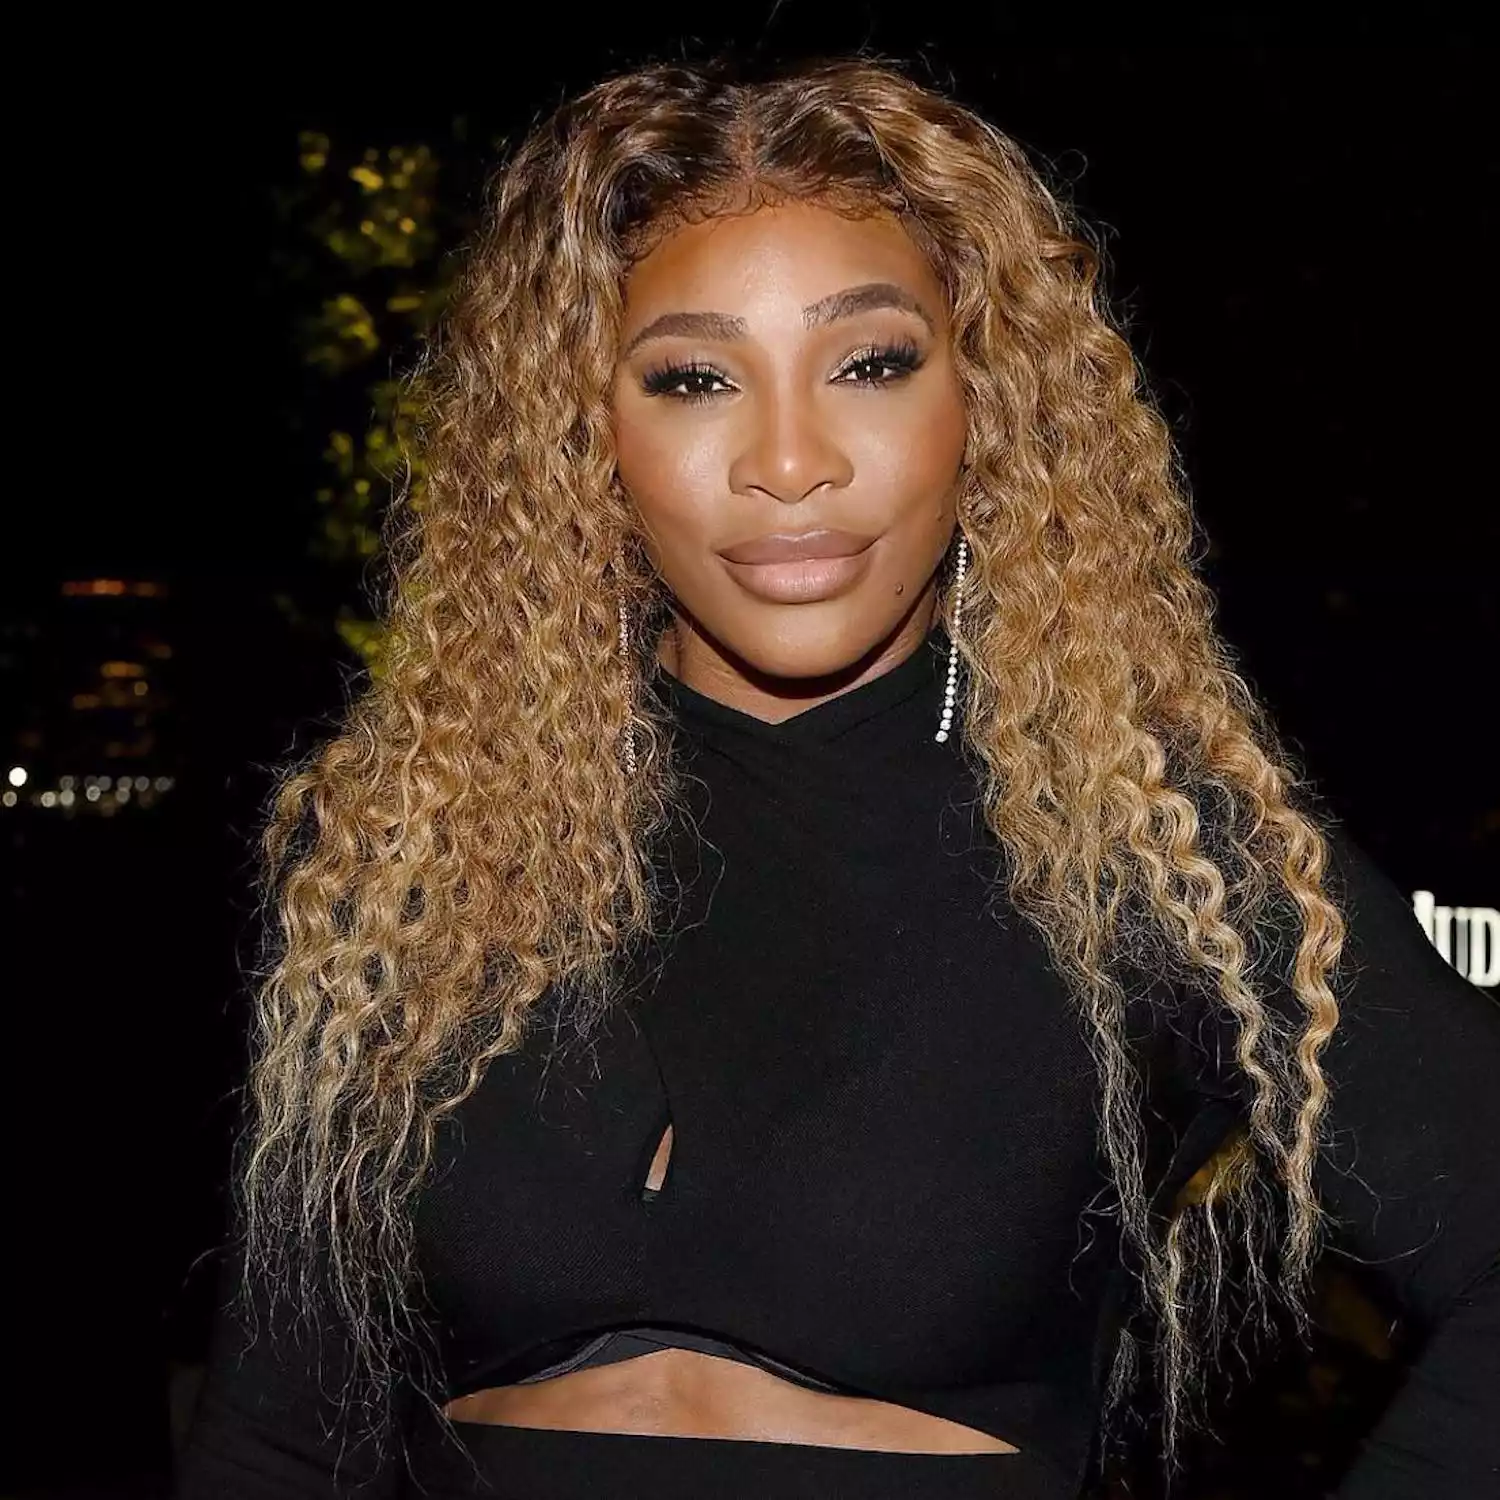 Serena Williams wears a golden beige blonde curly hairstyle and radiant makeup